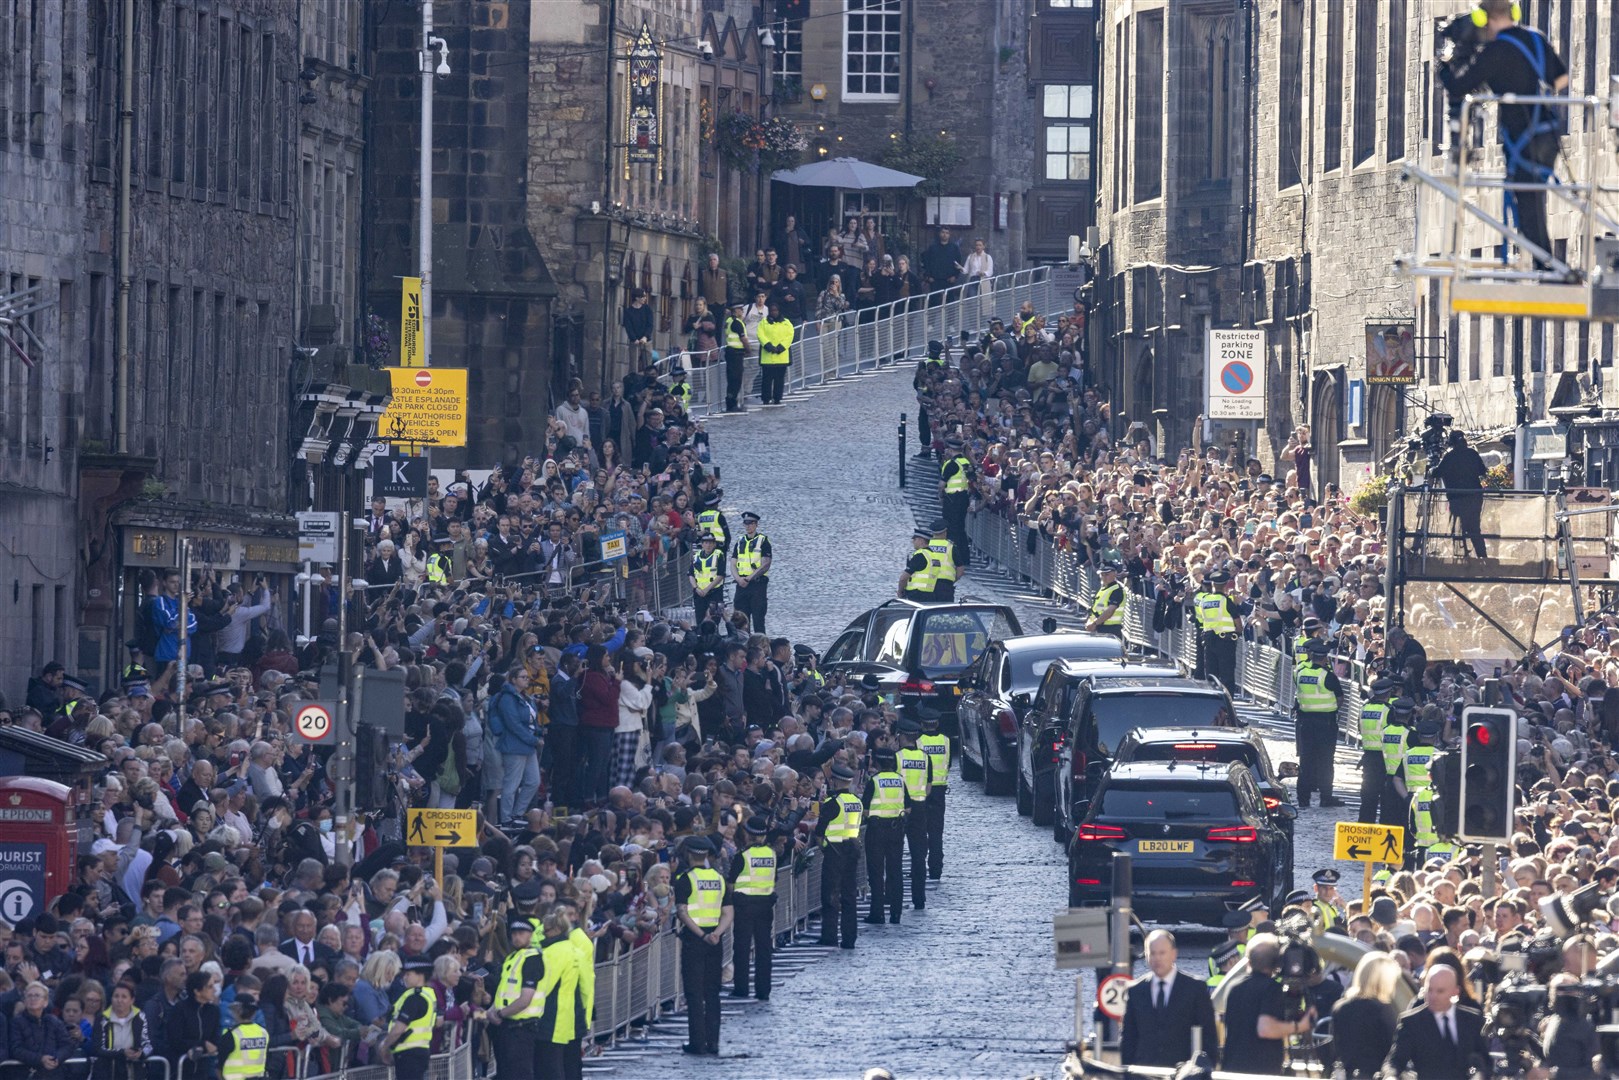 The hearse departs St Giles’ Cathedral, for Edinburgh Airport (Newsline/DailyMail/PA)